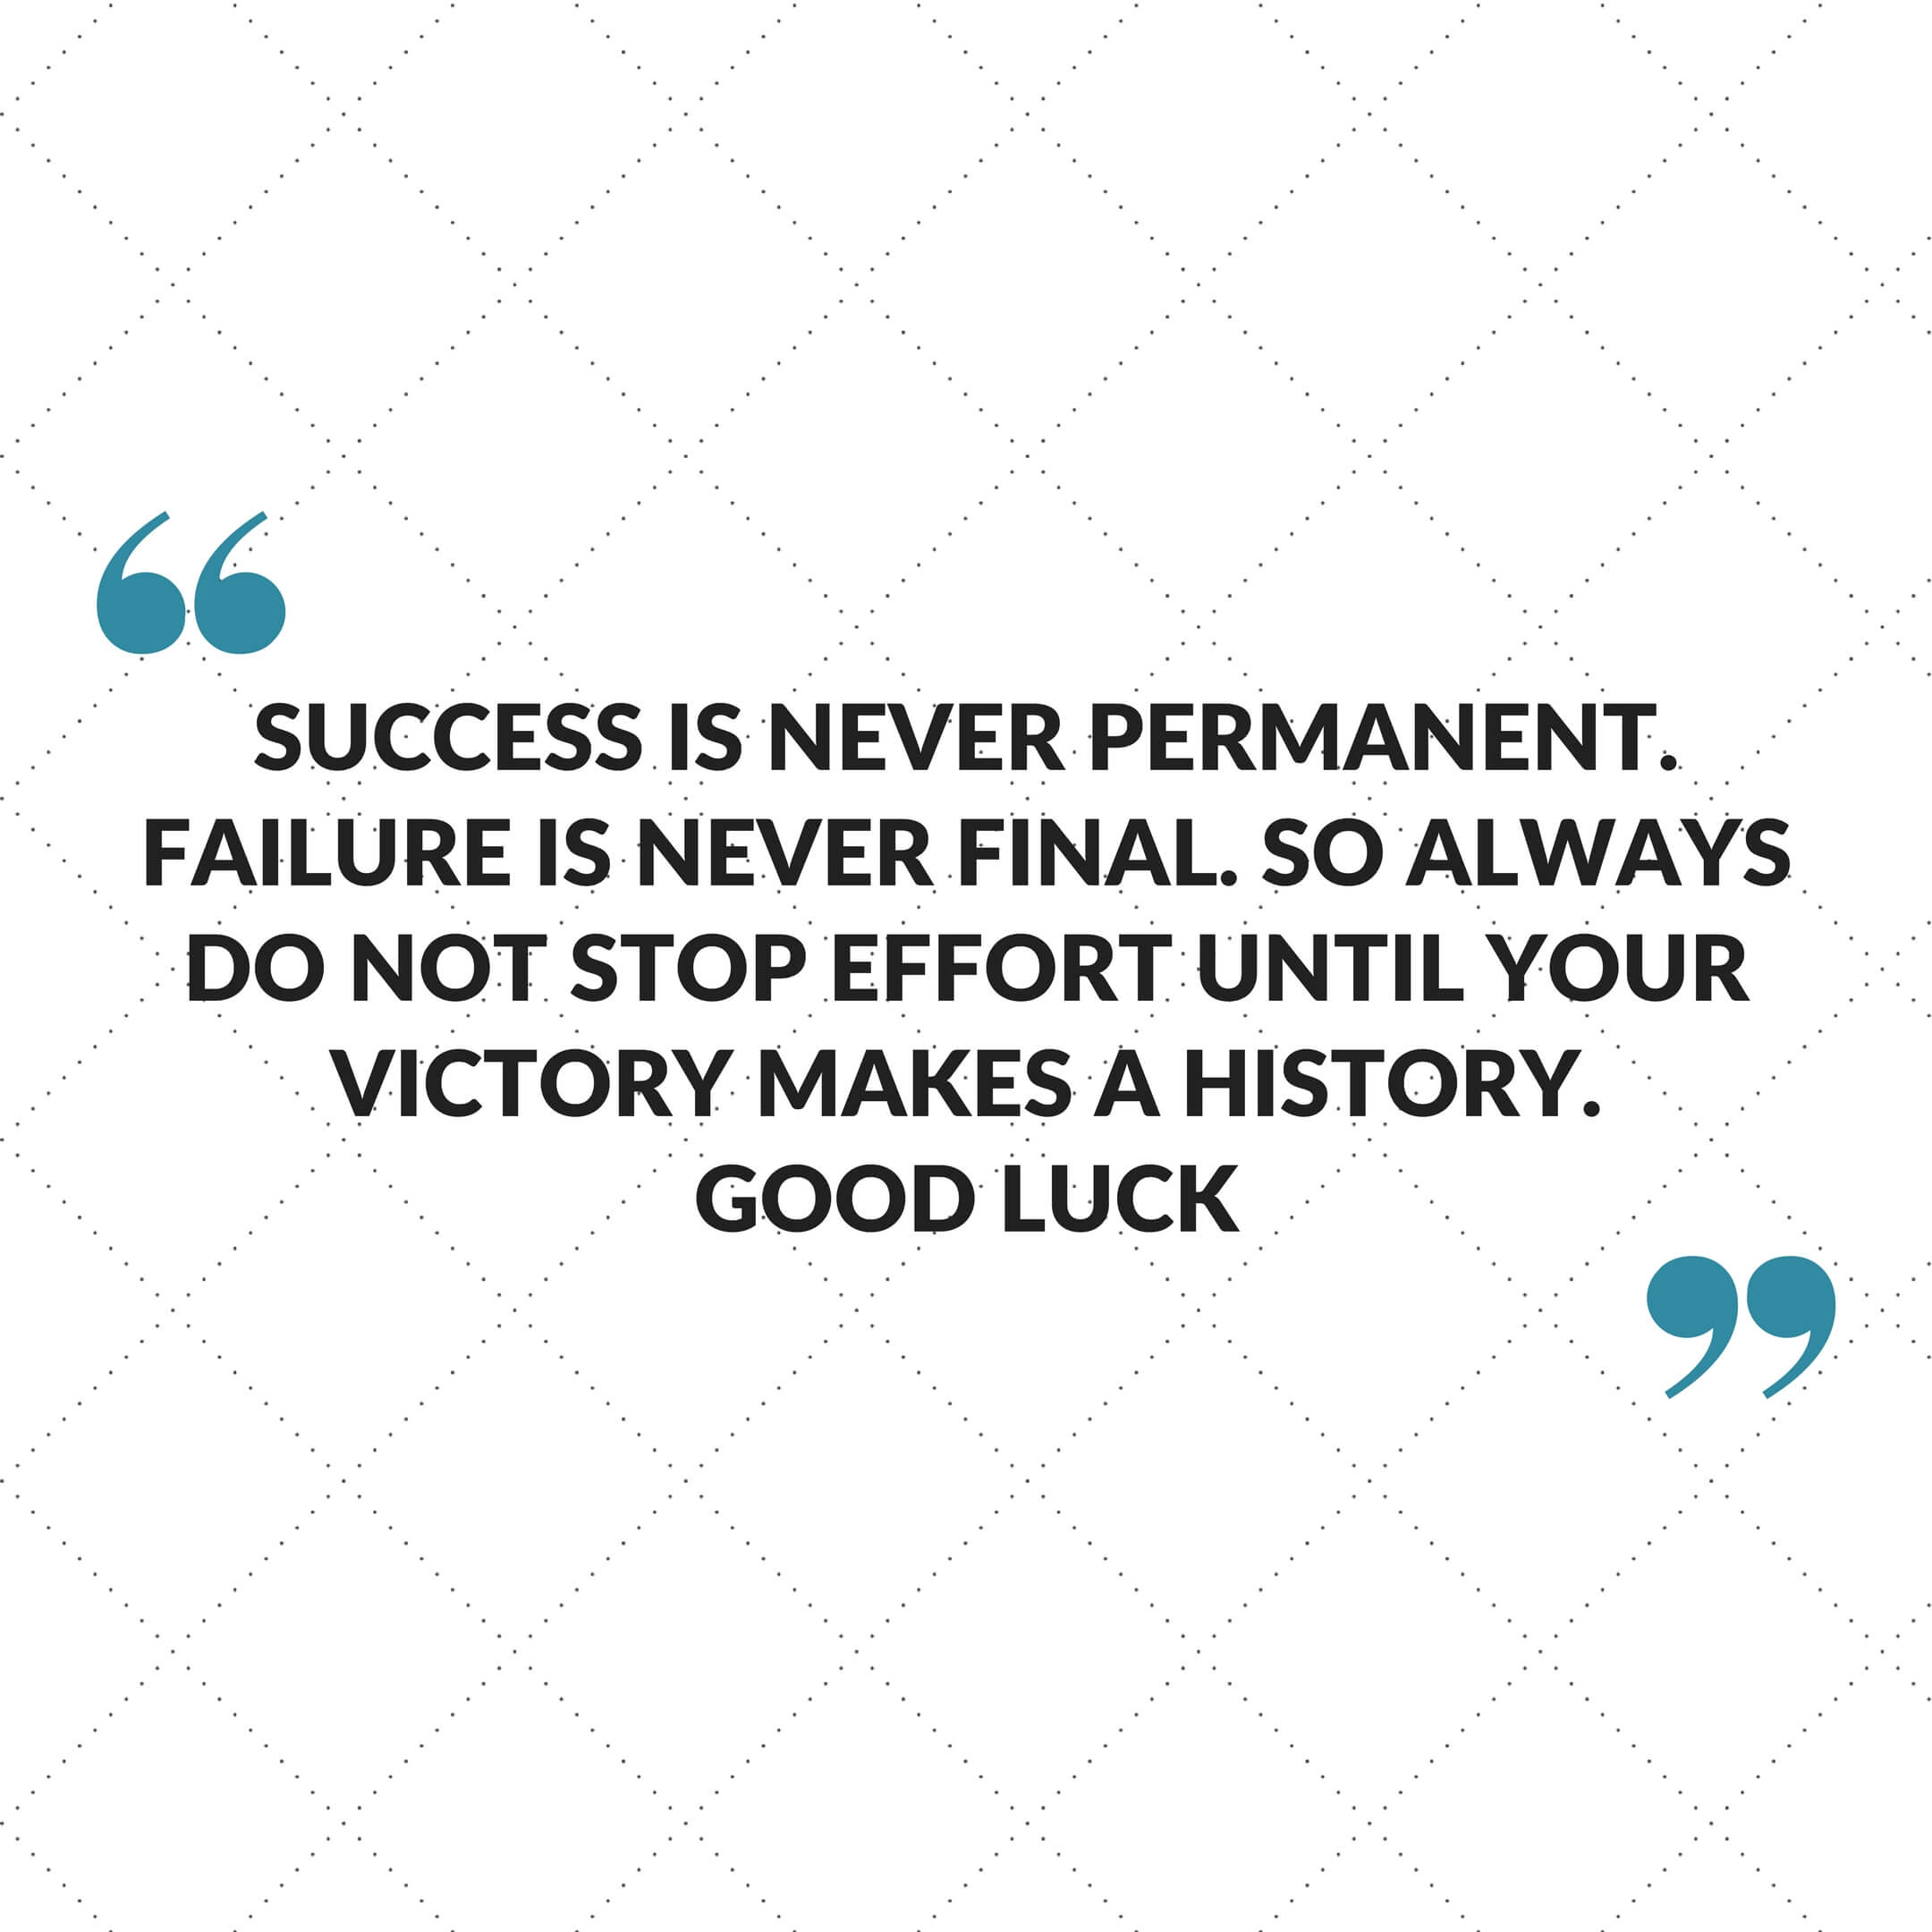 Success is never permanent. Failure is never final. so always do not stop effort until your victory makes a history. Good luck